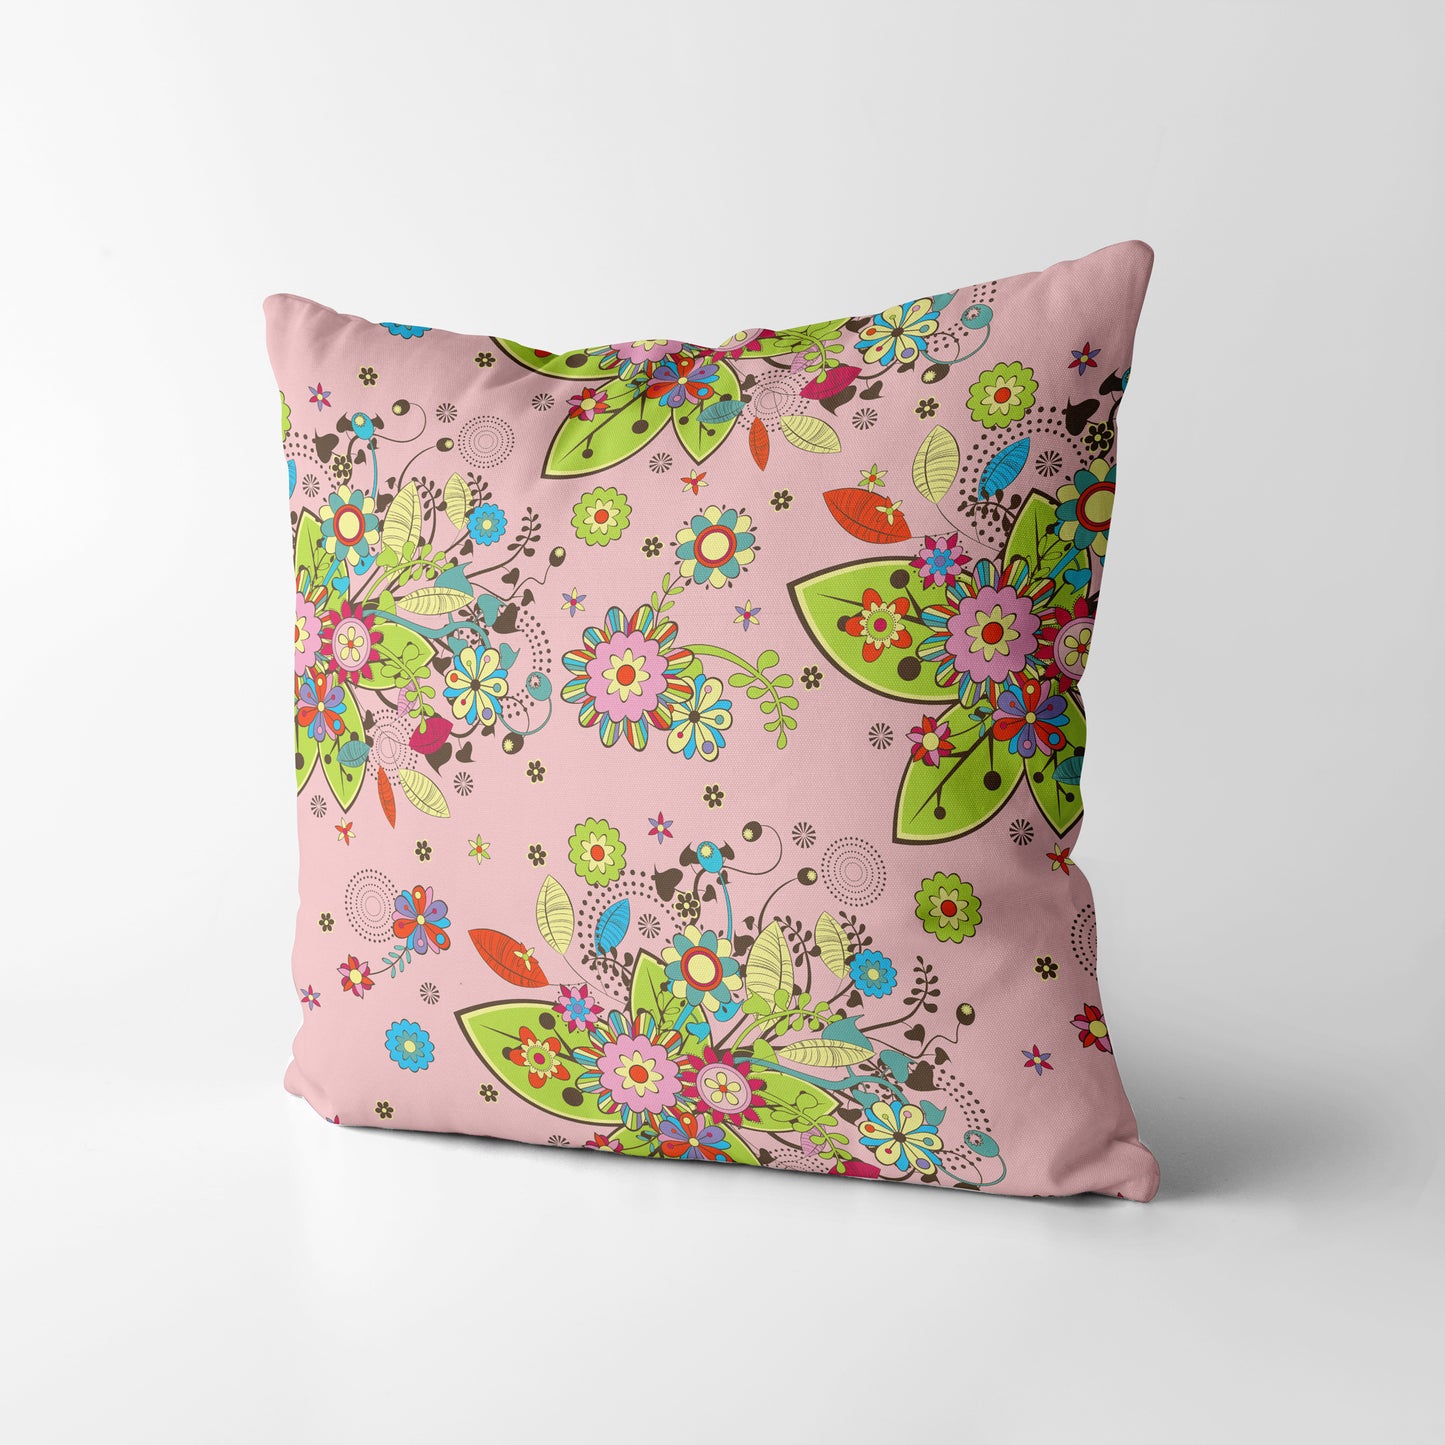 Summer and Spring Flowers - Square Cushion